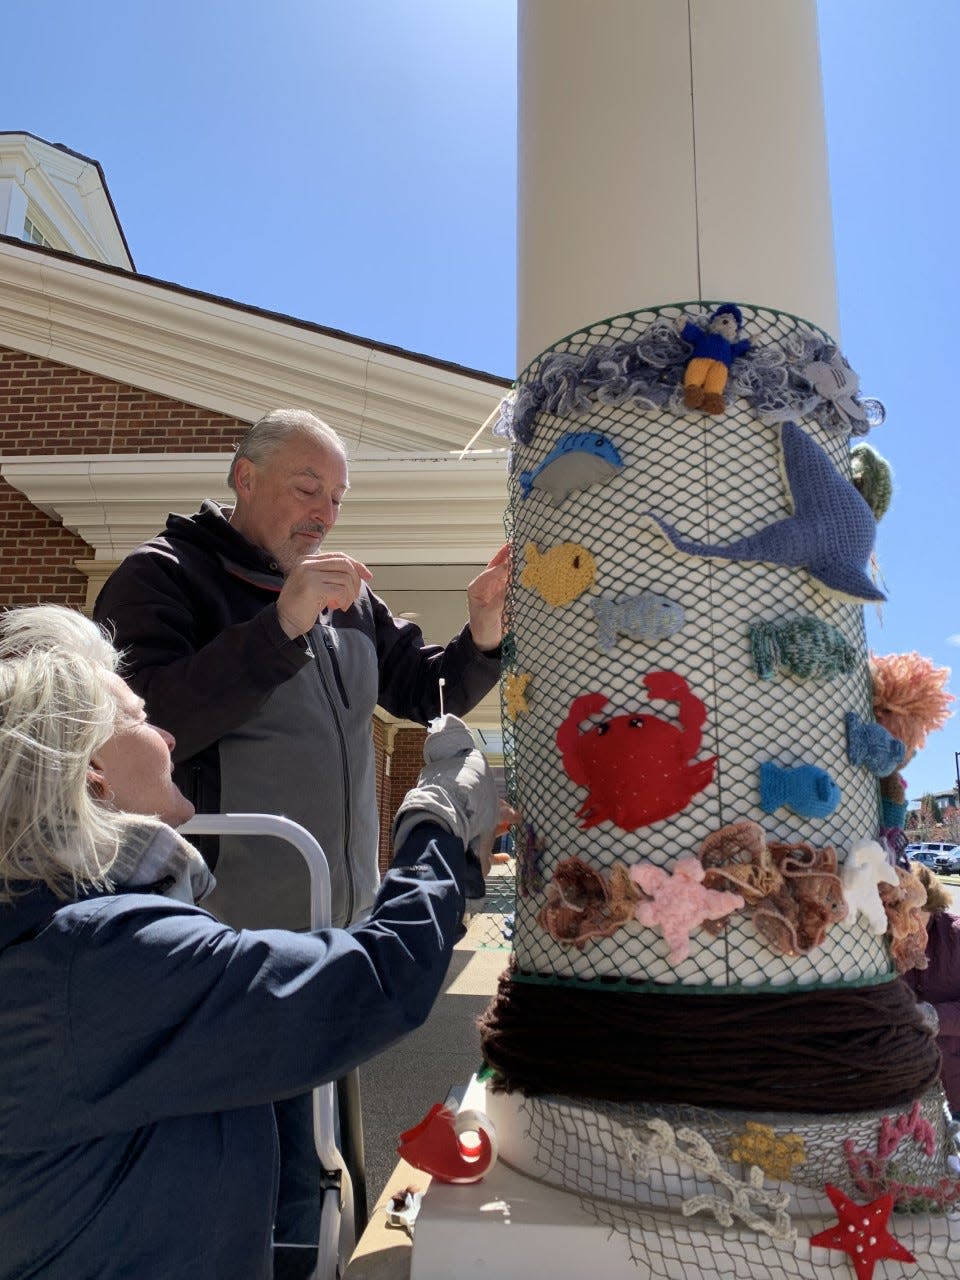 Volunteers attach sea creatures made out of yarn to a pillar for this year's Yarn Pop exhibit in Plymouth.